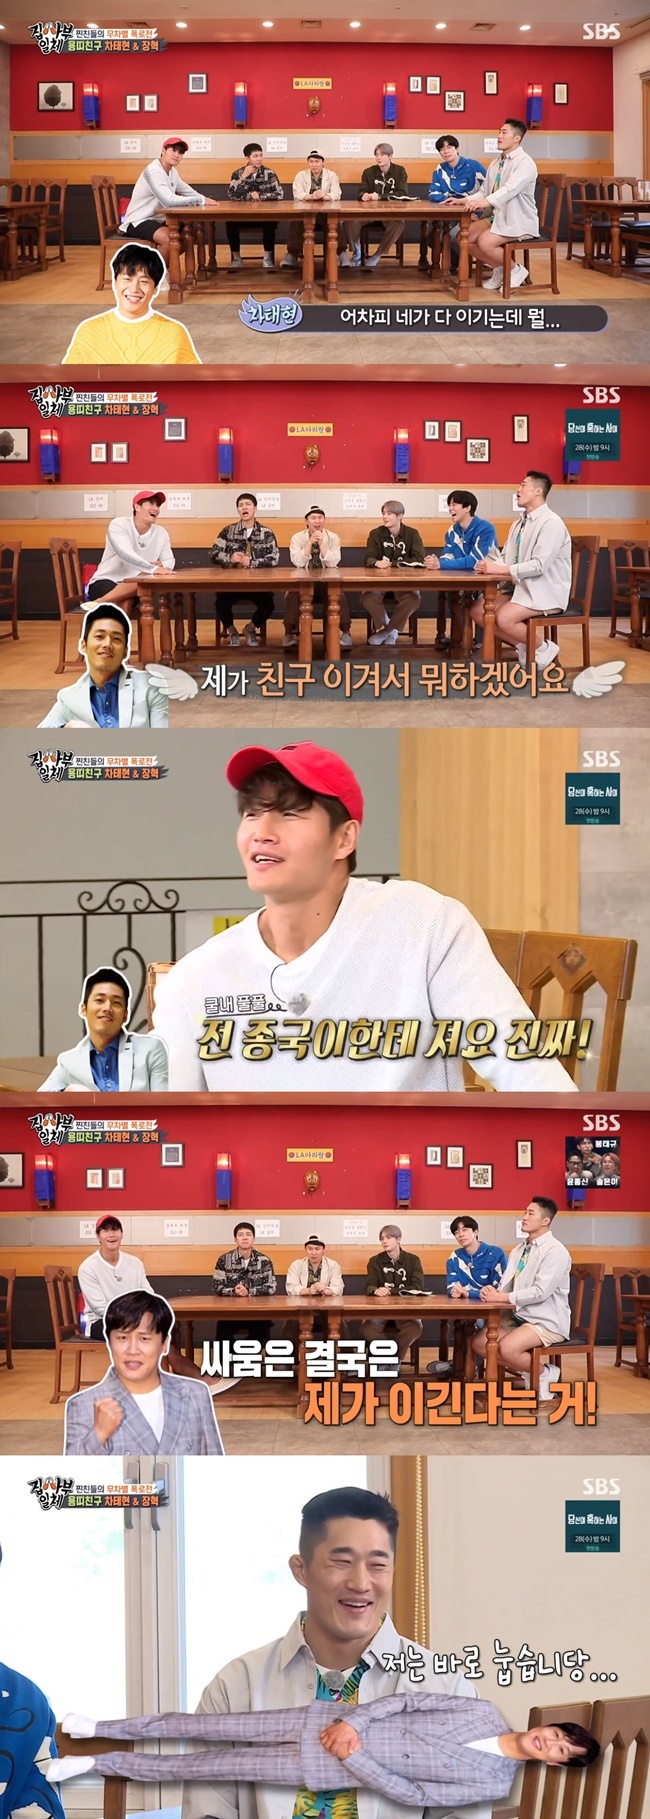 Jang Hyuk showed a face of the interpersonal ship.On April 25, SBS All The Butlers held a special vacation for the master Kim final time.A surprise phone connection with his best friend was made to testify about Kim Jong-kooks desire to win the match.Cha Tae-hyun said, What did you do today and did you show such a desire? You win there anyway.Among them, the disciples asked, There was a story about the talent of the entertainment industry, and asked, Who will win if Jang Hyuk and Kim Jong-kook fight the street?Then Jang Hyuk, who was with Cha Tae-hyun, got the call.Jang Hyuk, who said he had moved his interest from the tempo to Fitness Boxing earlier, said, Lets just say final time won, but final time wins.What do I do when I win Friend? Yang said, This is what Jang Hyuk won.